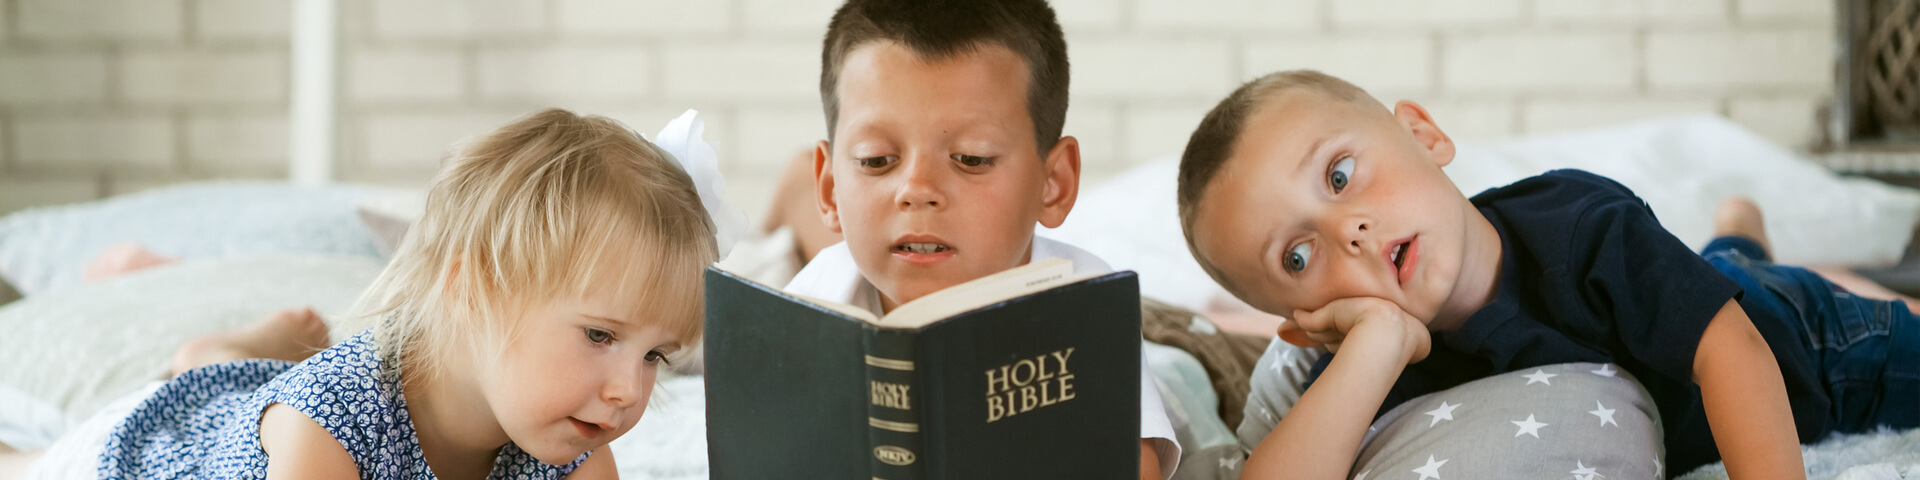 Three Kids, Child in the middle holding the bible so all Three can read it together.